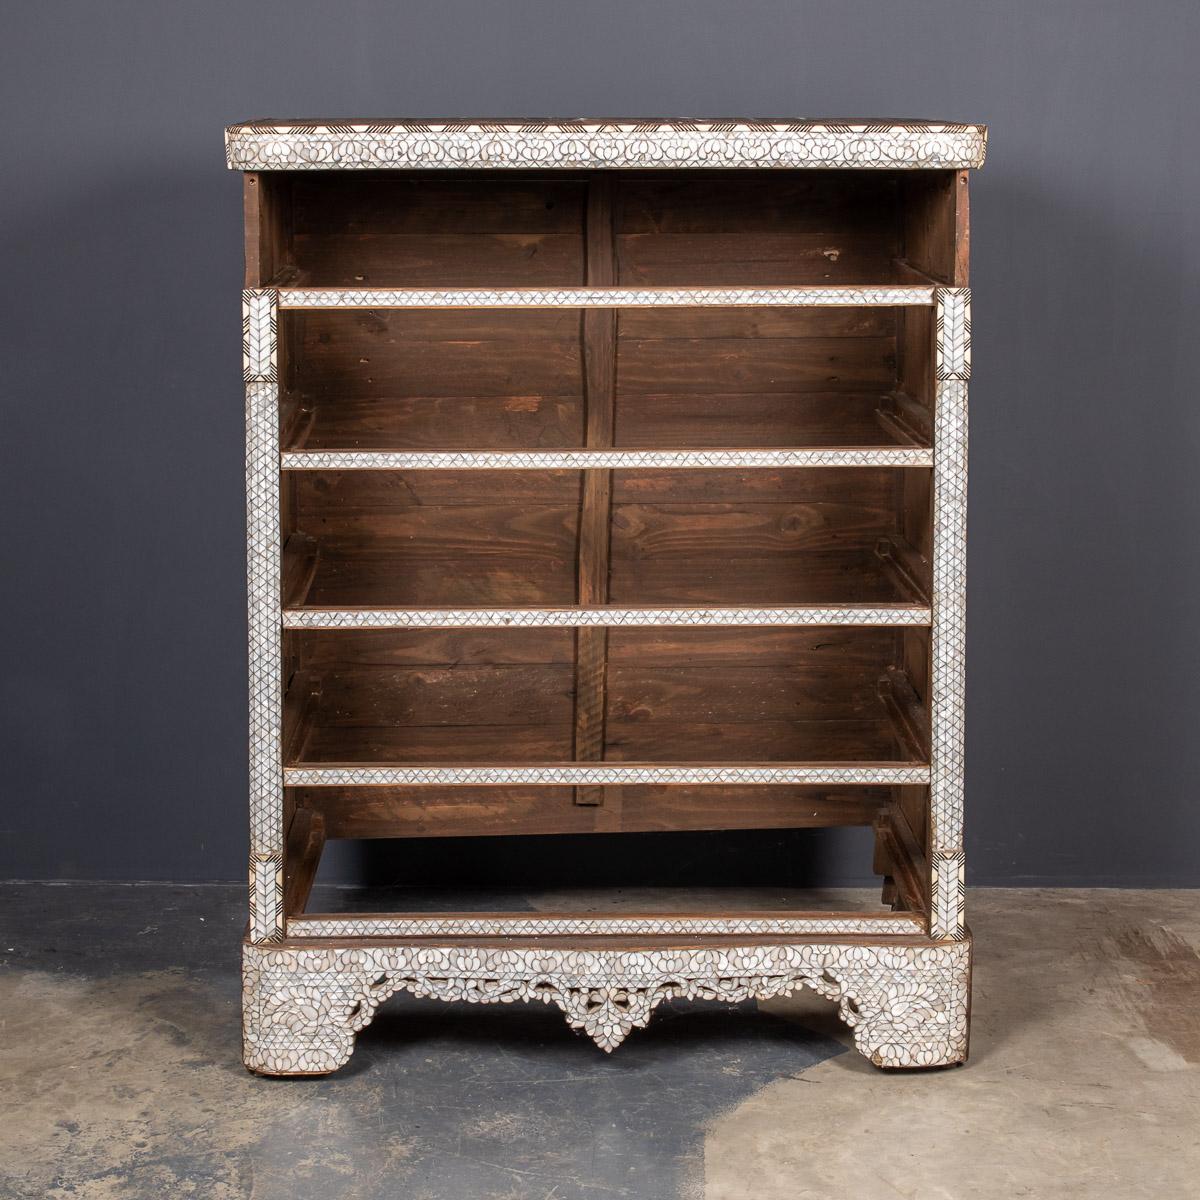 Antique early-20th century Middle-Eastern mother of pearl decorates the front of this beautiful five drawer chest. The handles are carved from camel bone and set in a daisy style inlay. This piece has a curved, white marble top and beveled wooden